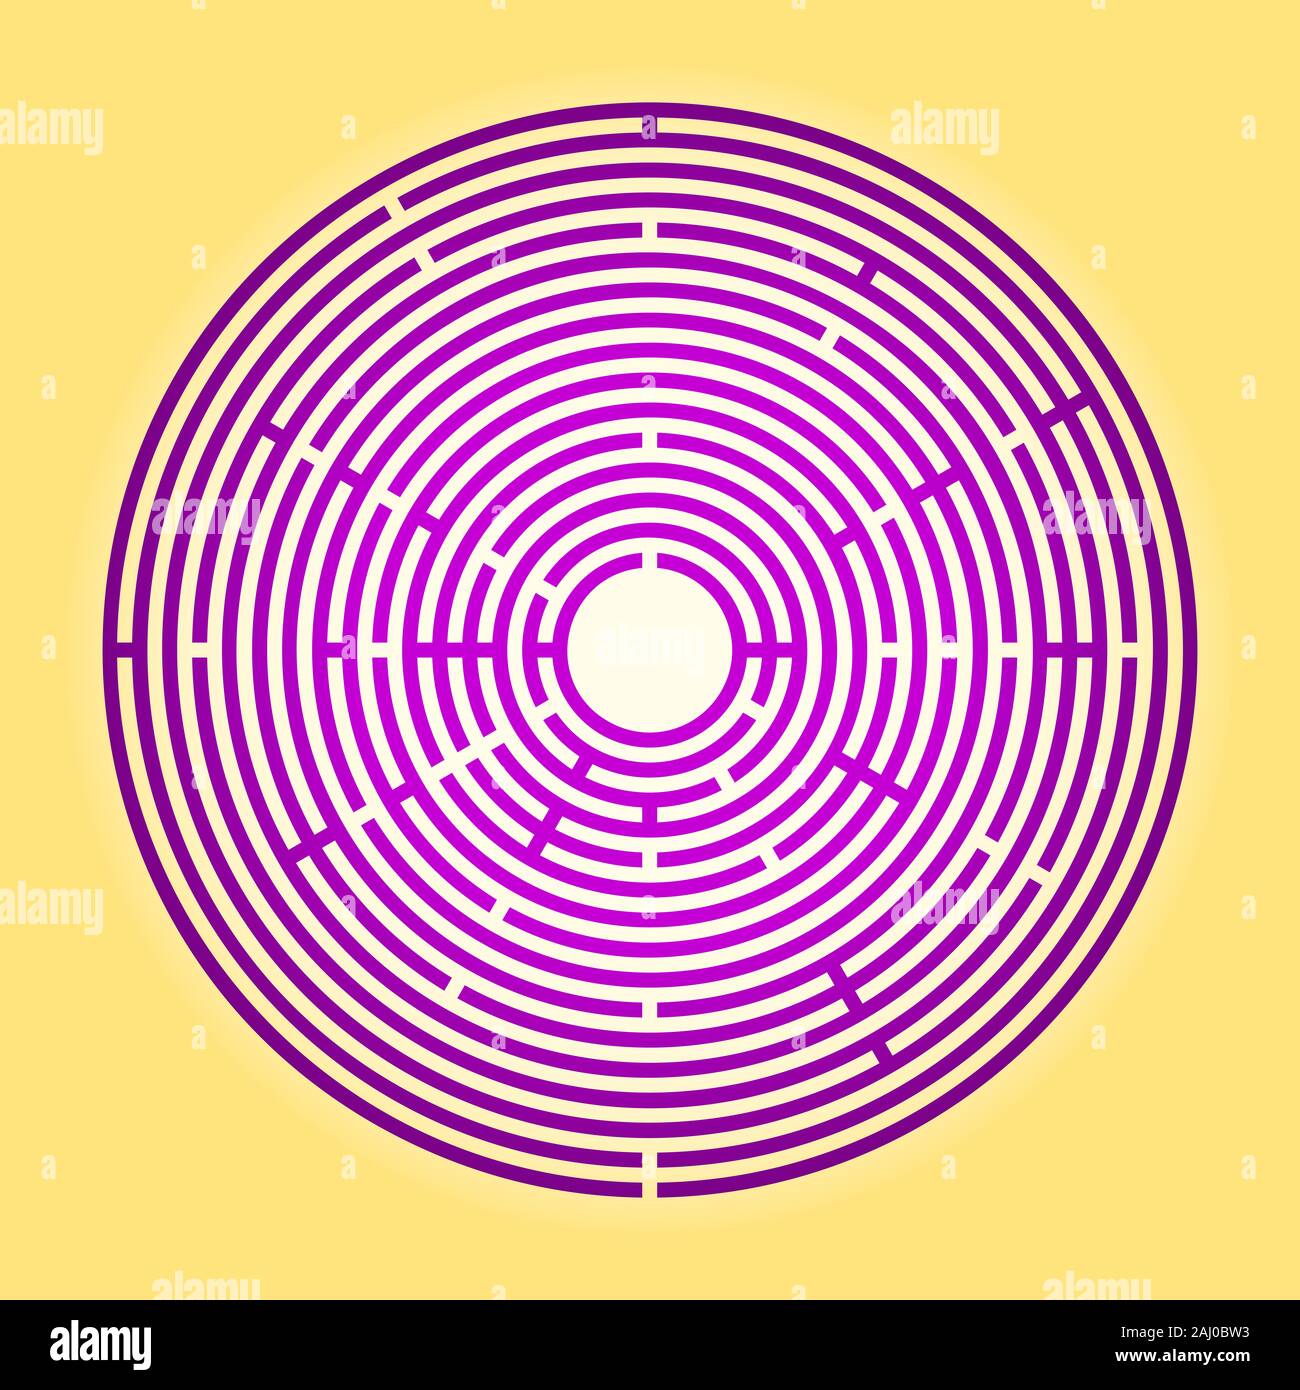 Colored large circular maze. Big purple radial labyrinth over yellow background. Find a route to the centre, follow the path to the goal. Stock Photo